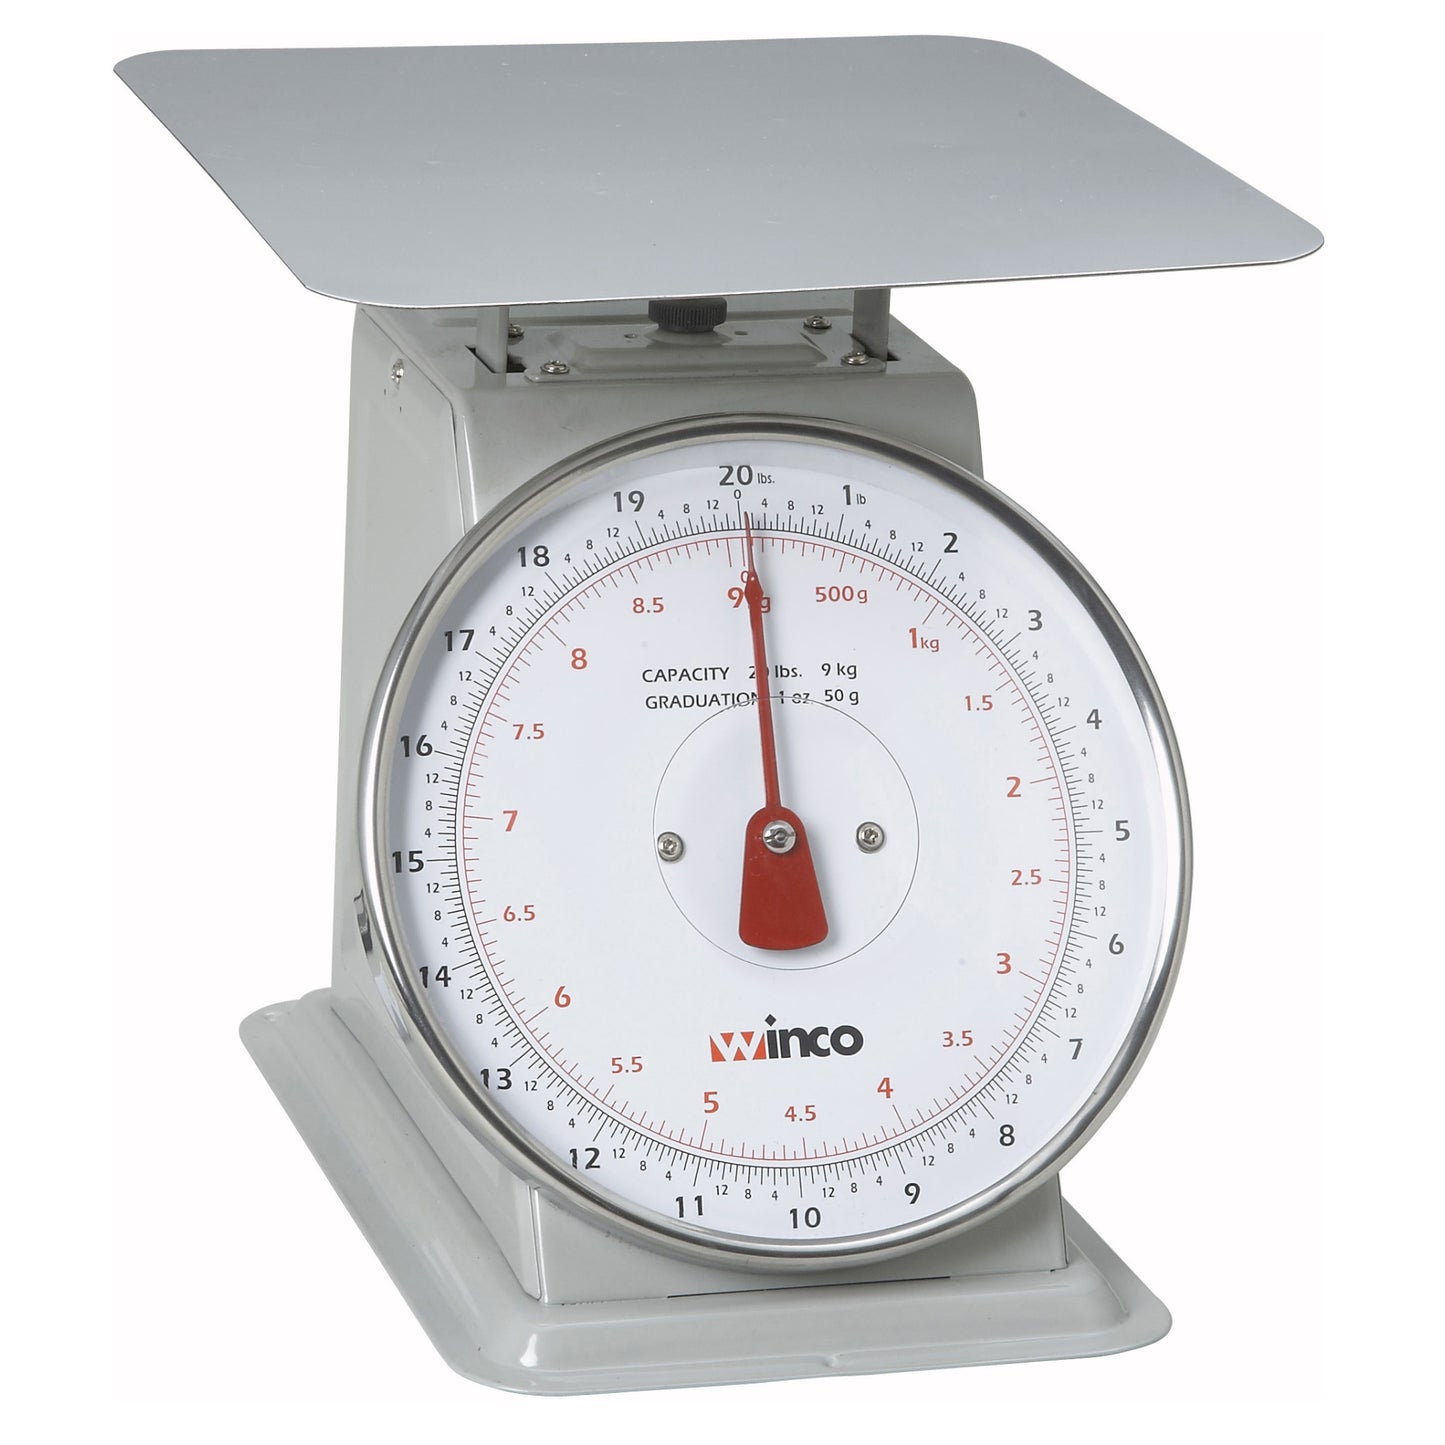 SCAL-820 - Receiving Scale - 20 lbs